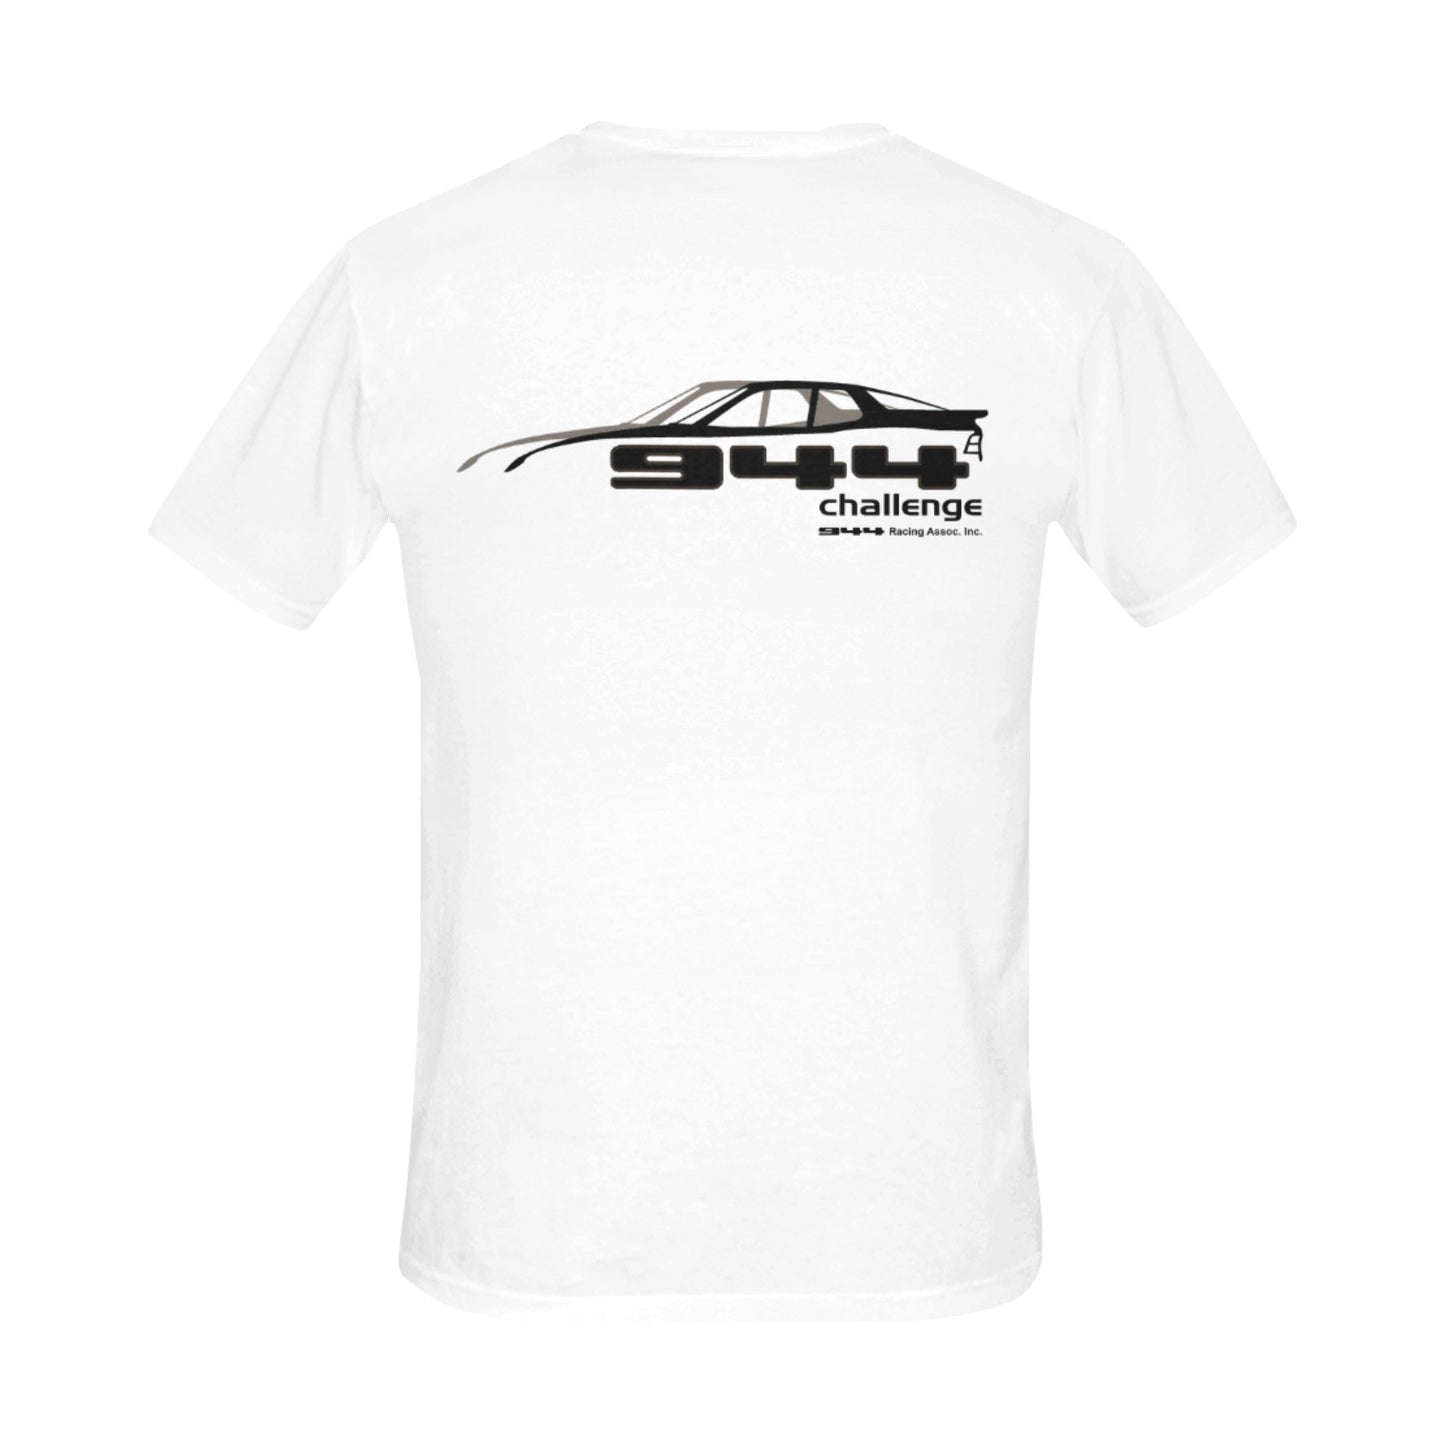 944 CHALLENGE 100% cotton 944 outline straight T-shirt -  circuit white - Fitted